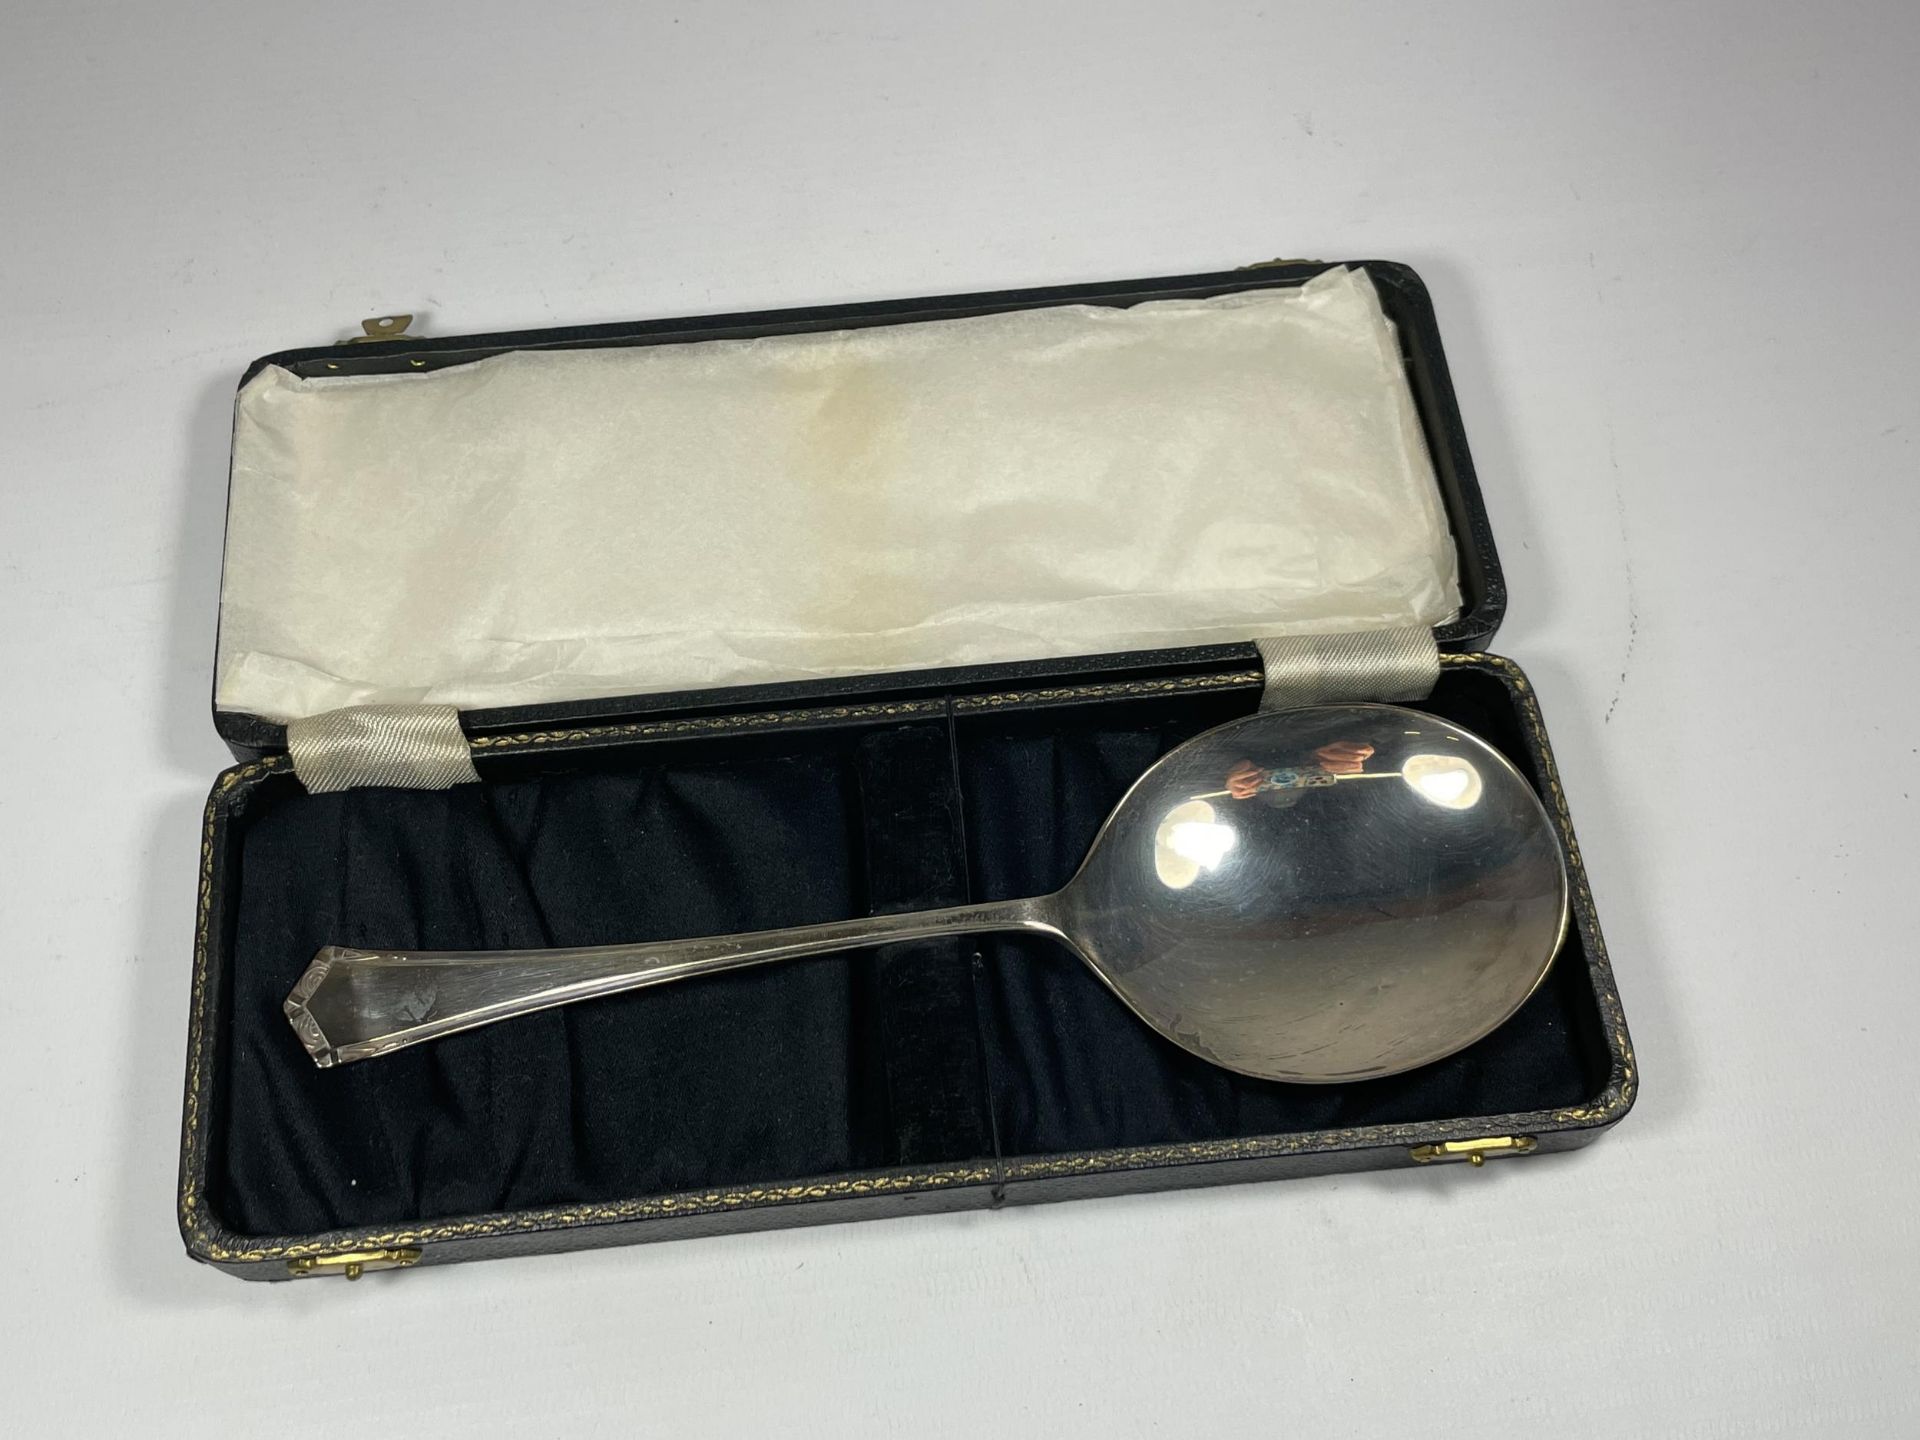 A GEORGE V SILVER CASED SERVING SPOON, HALLMARKS FOR BIRMINGHAM, 1919, WEIGHT 70G